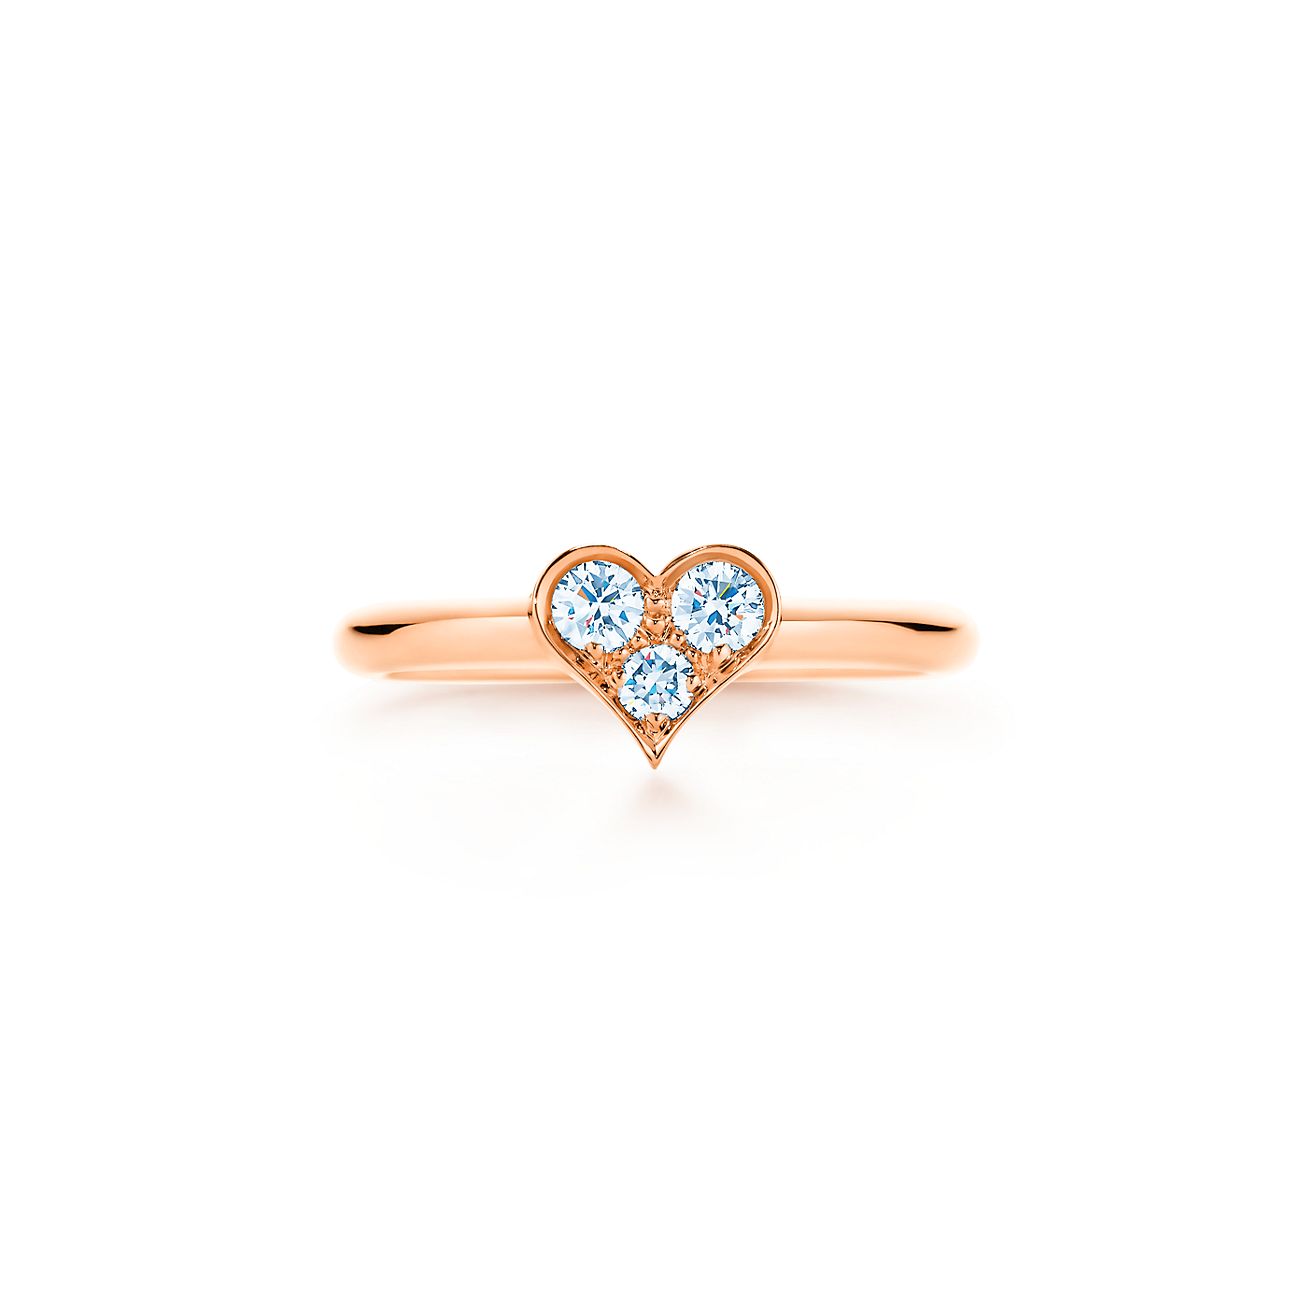 Buy Malabar Gold and Diamonds 22k Gold Heart Ring for Women Online At Best  Price @ Tata CLiQ